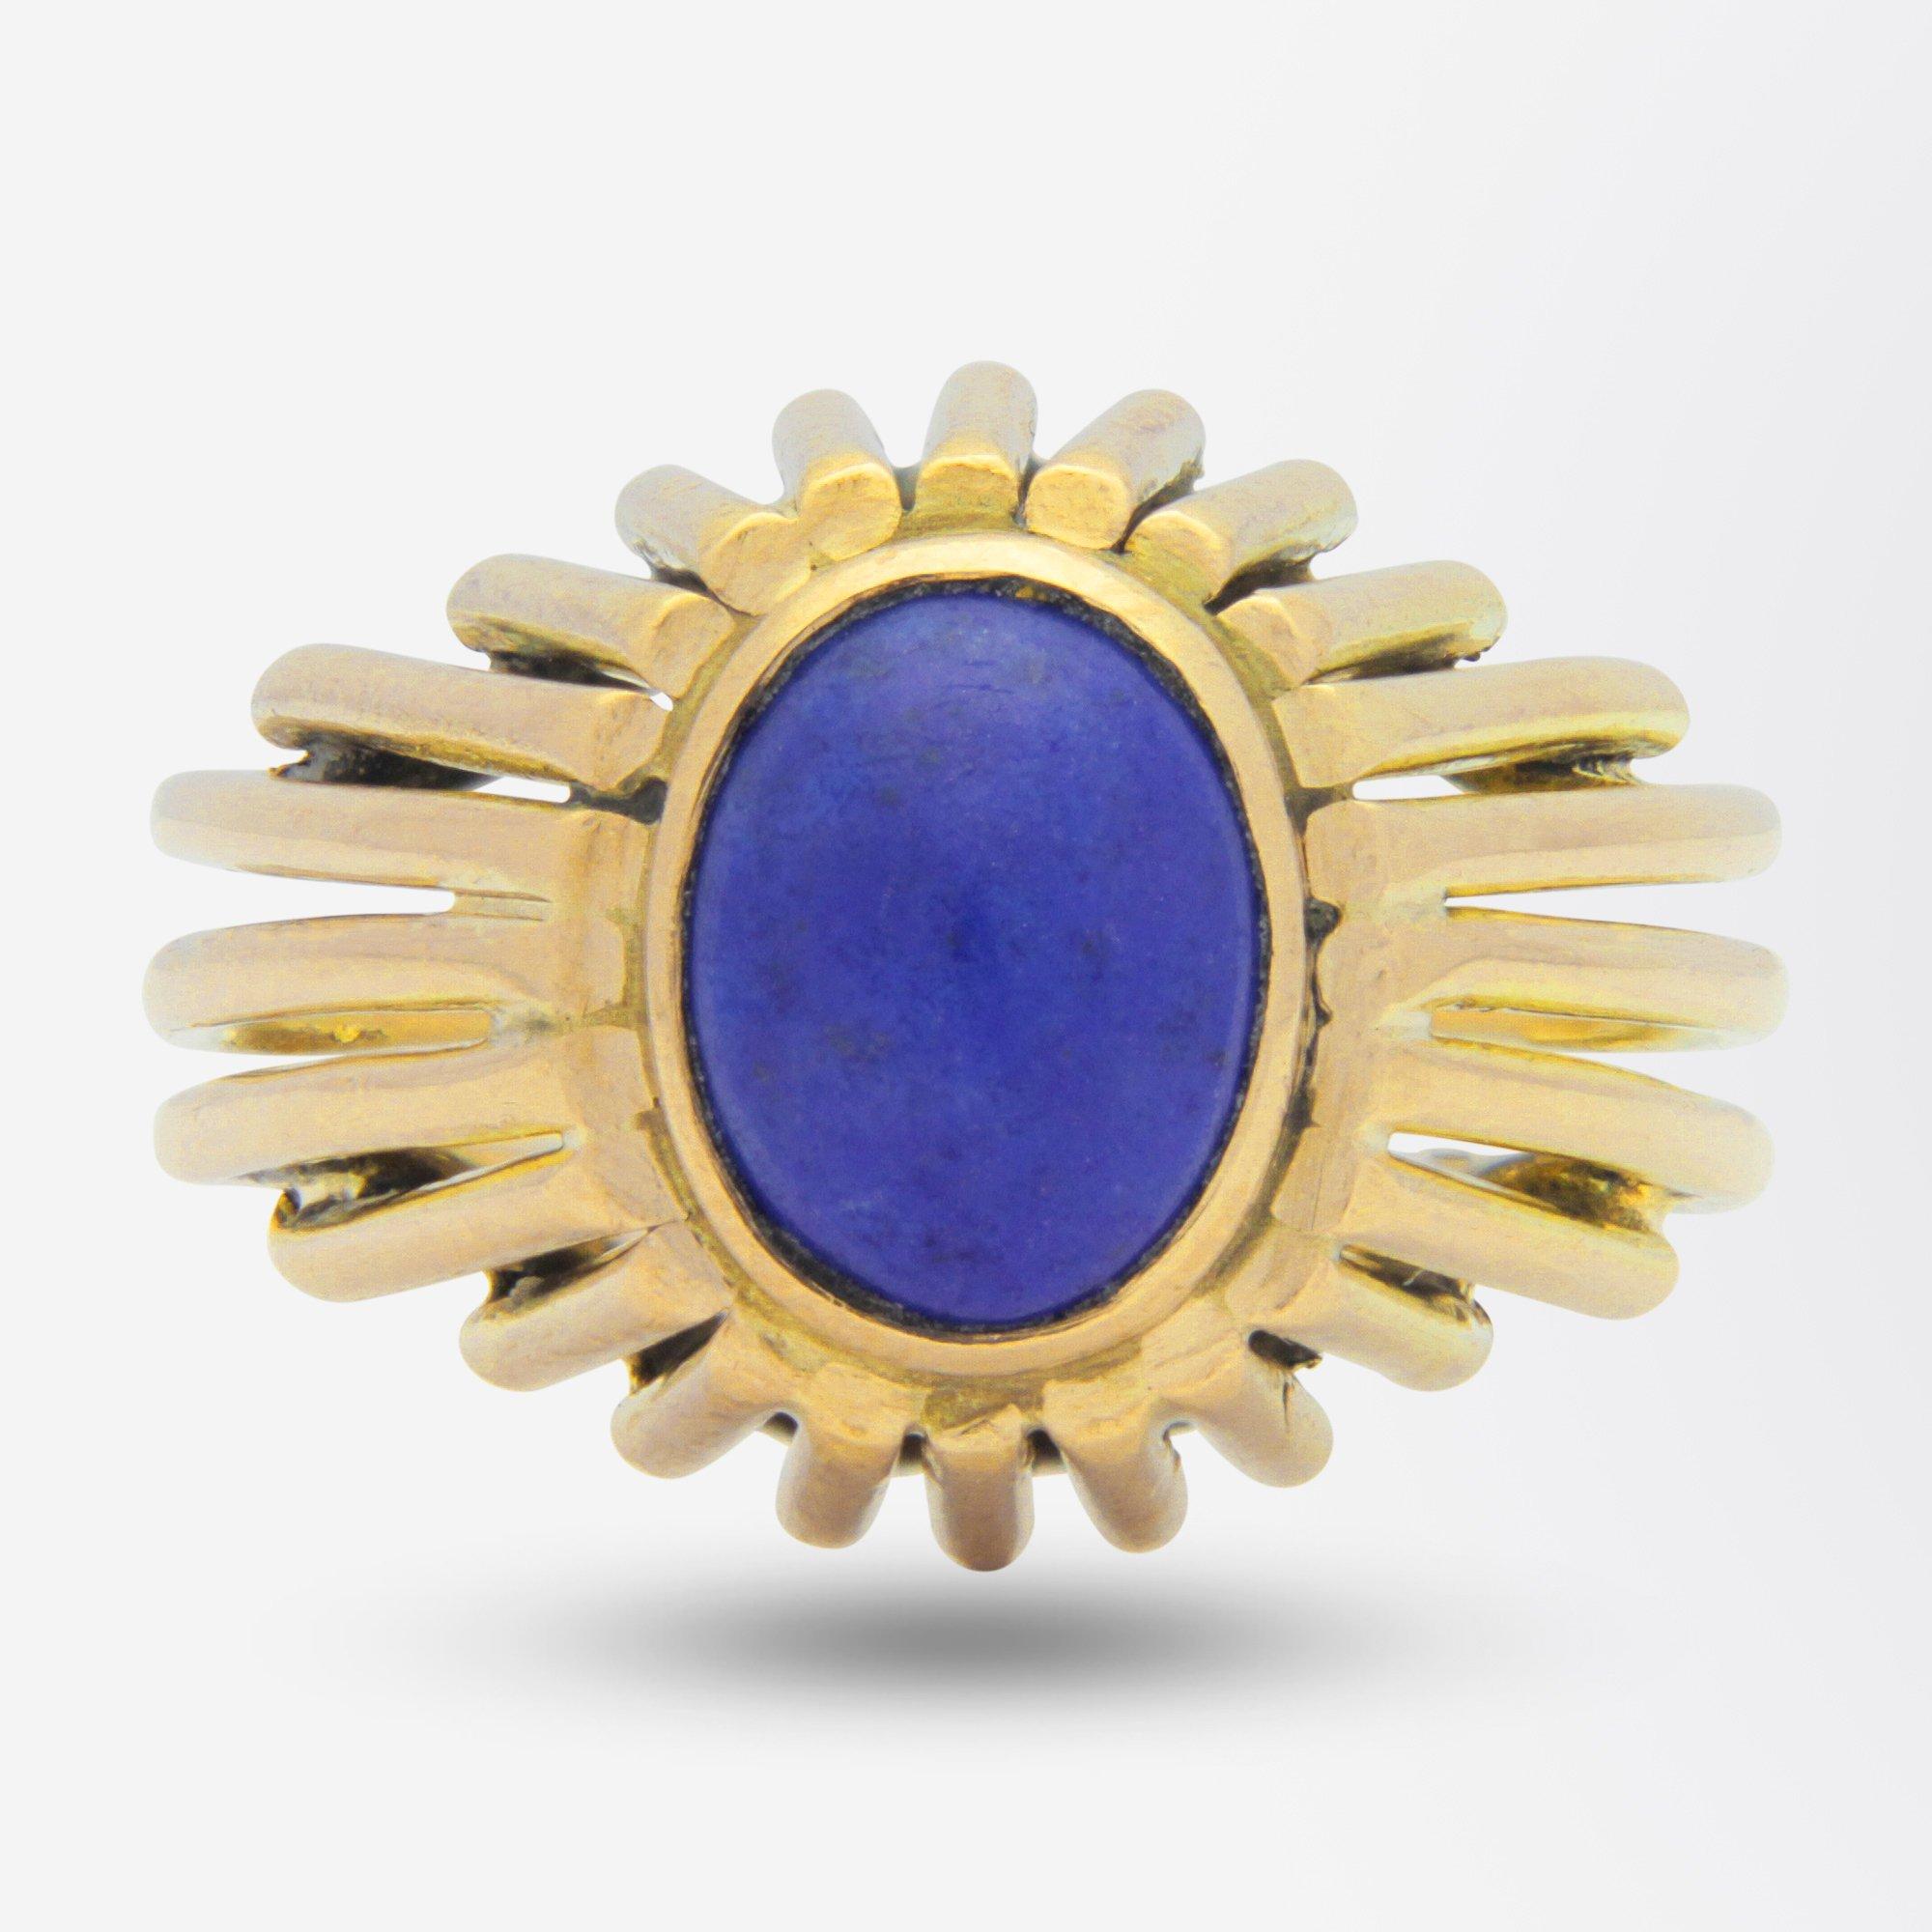 A beautifully crafted yellow gold ring set with a cabochon piece of lapis lazuli. The ring is created with thin strands of 14 karat yellow gold which have been fused together to create a shank and 'bombe' type setting which houses the cabochon lapis